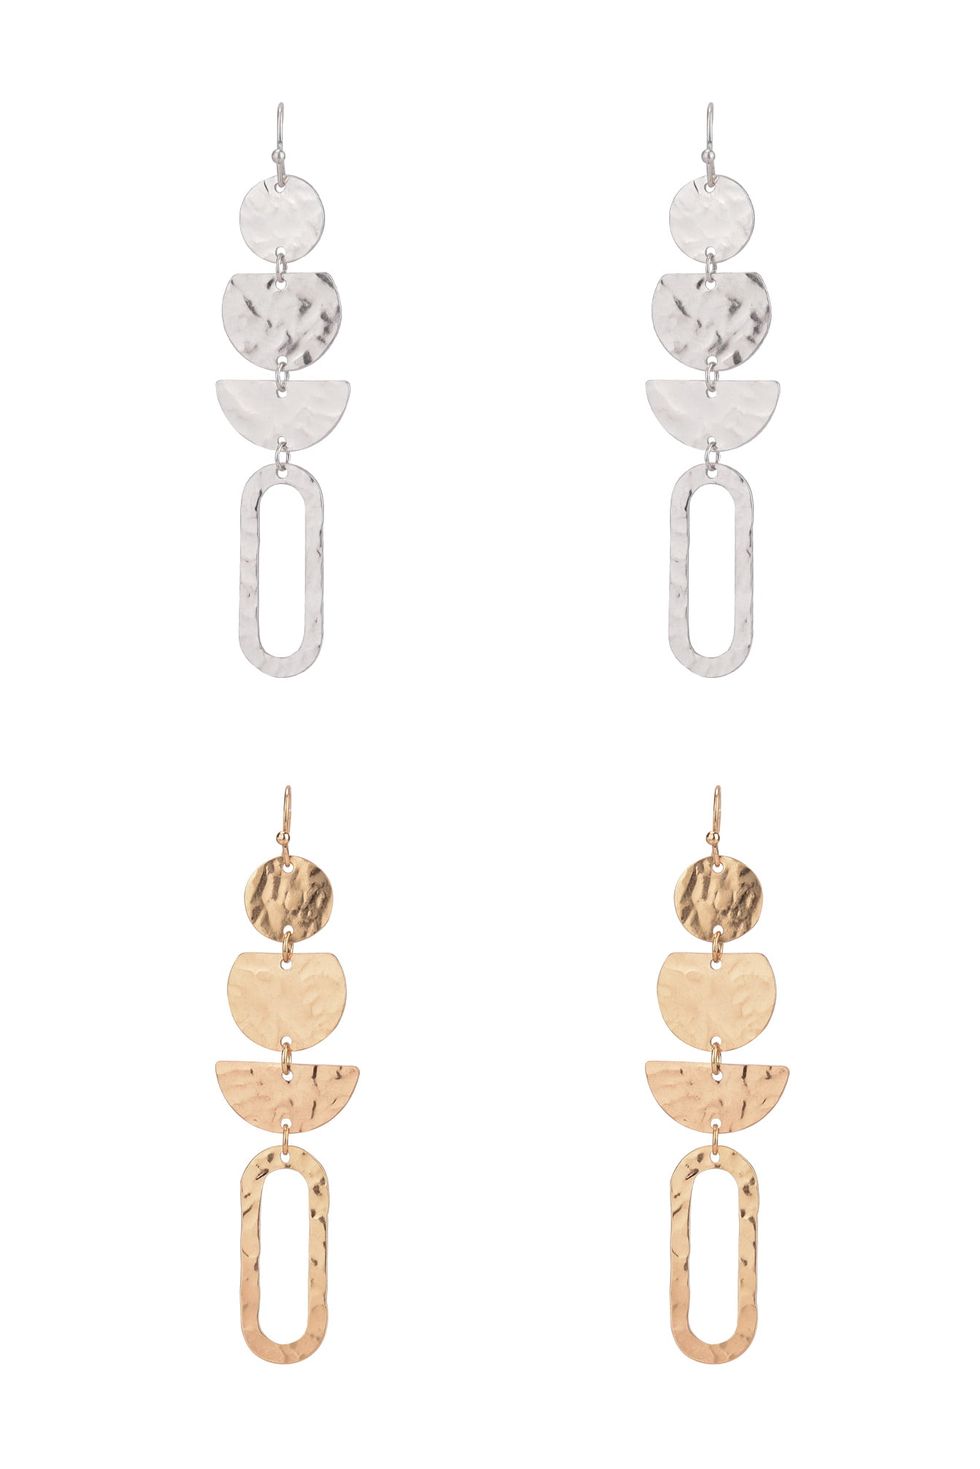 The Pioneer Woman Silver and Gold Metal Drop Duo Earring Set